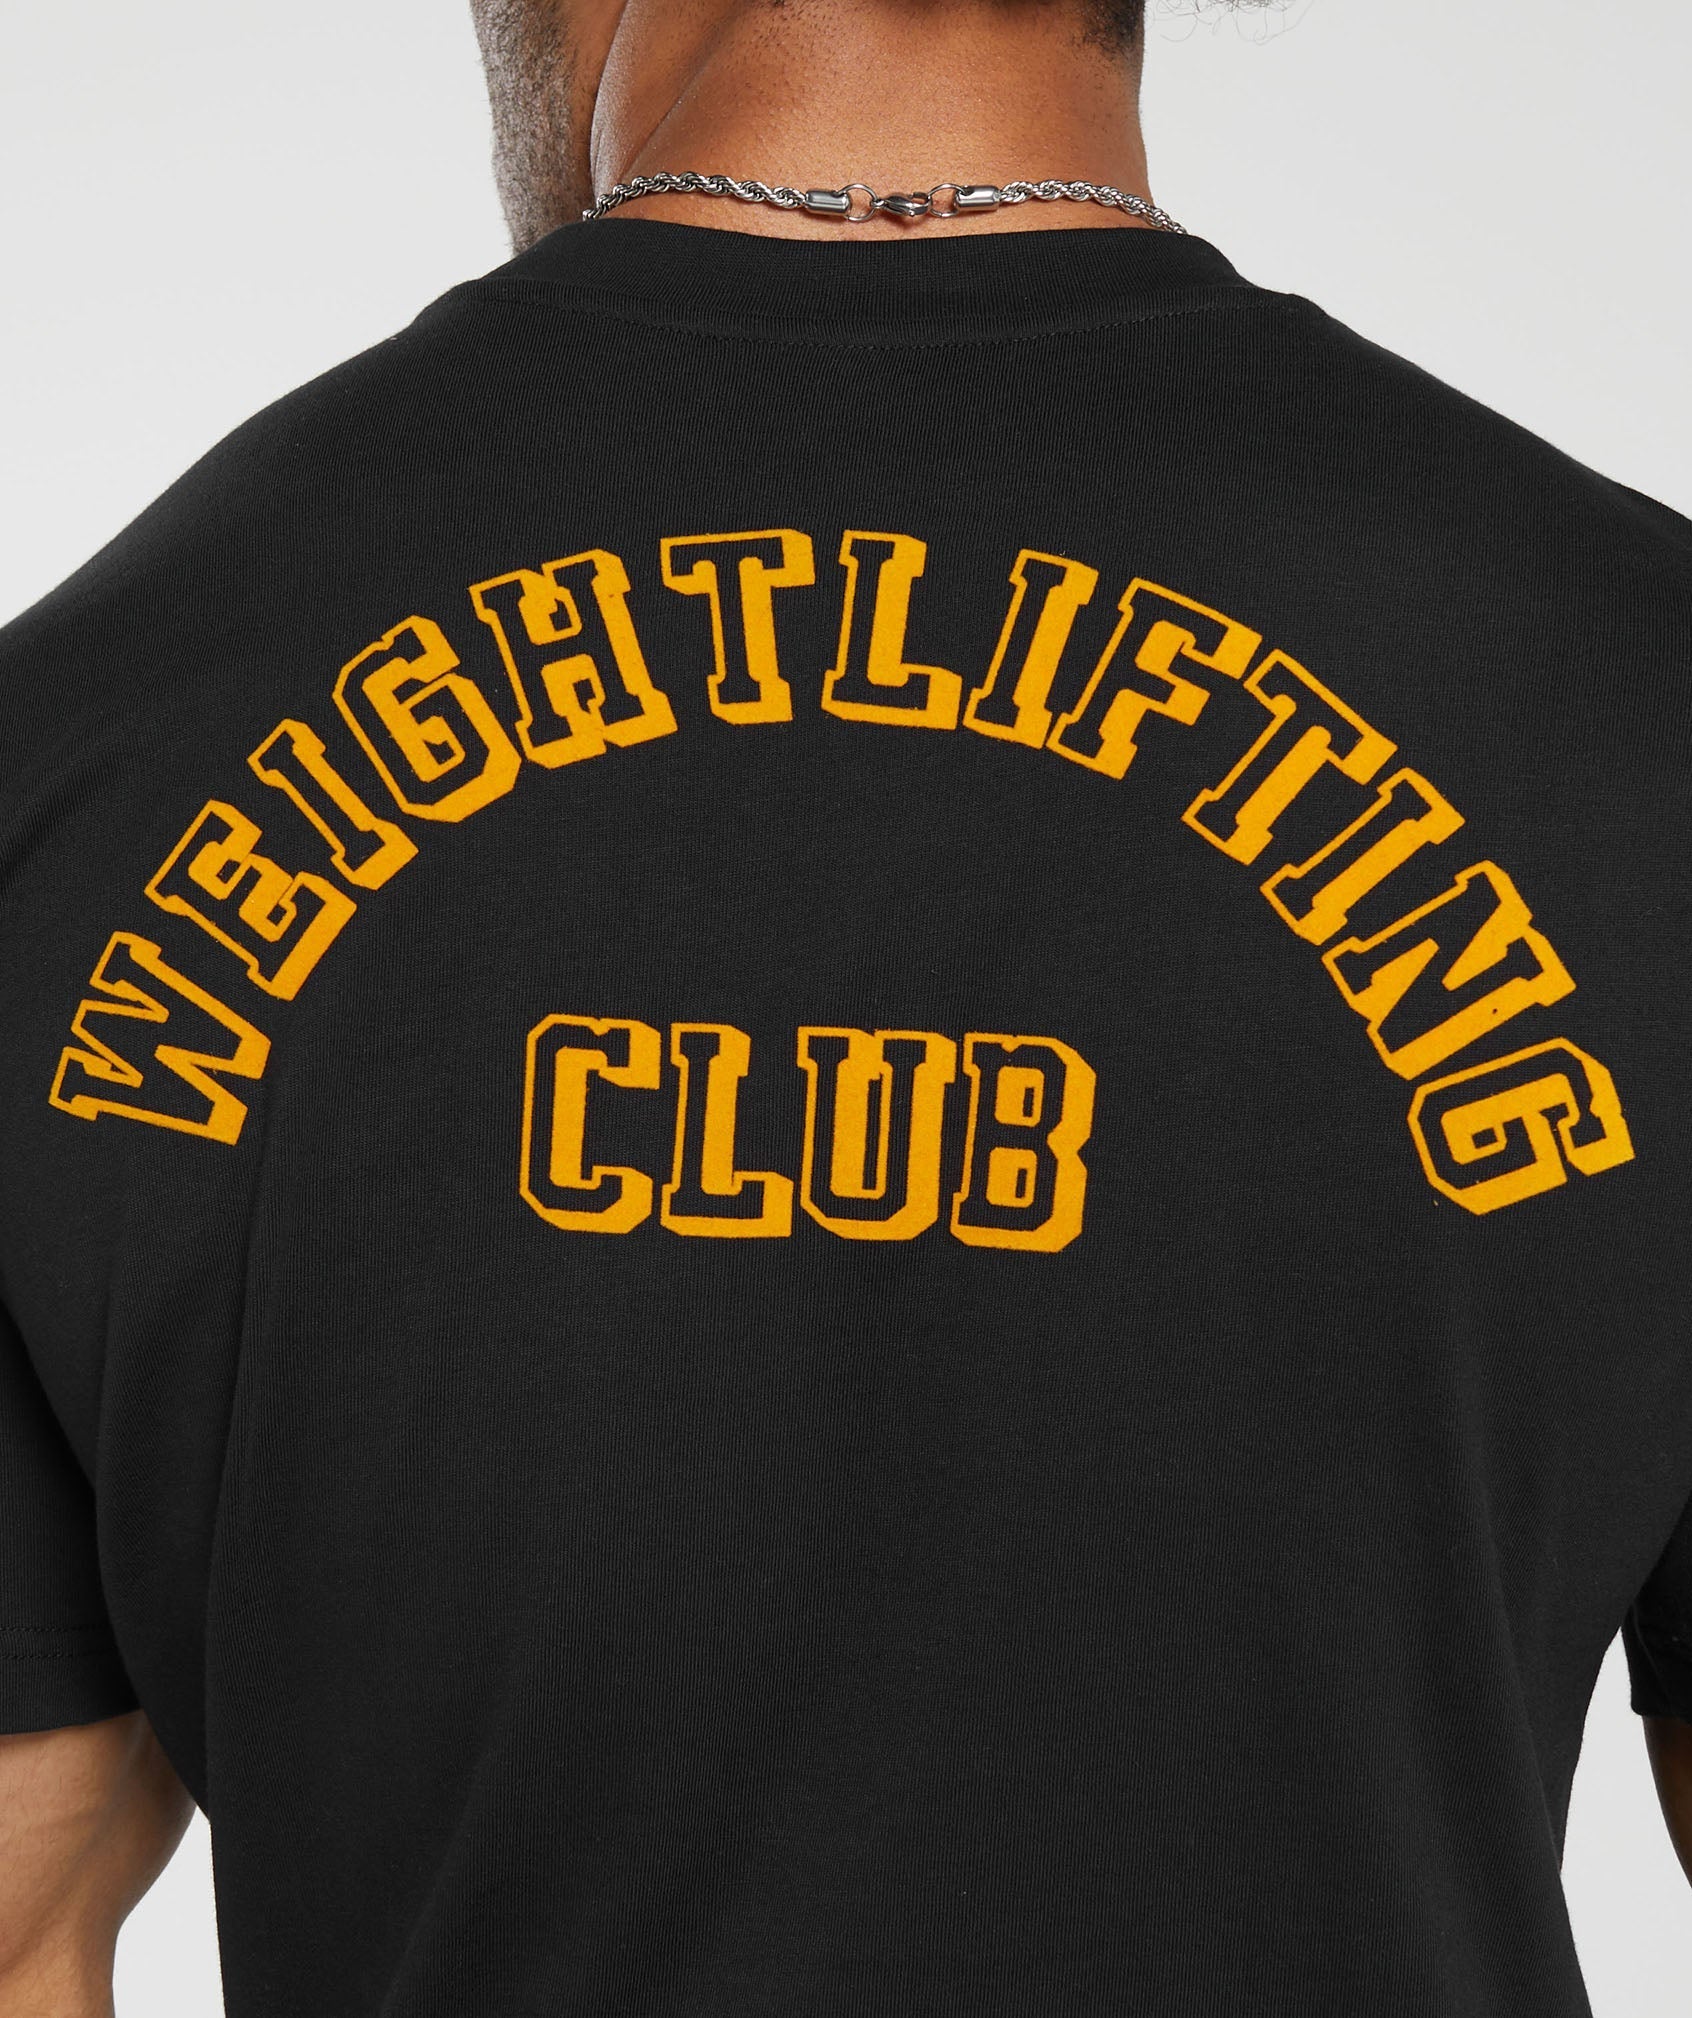 Weightlifting Club T-Shirt in Black - view 5